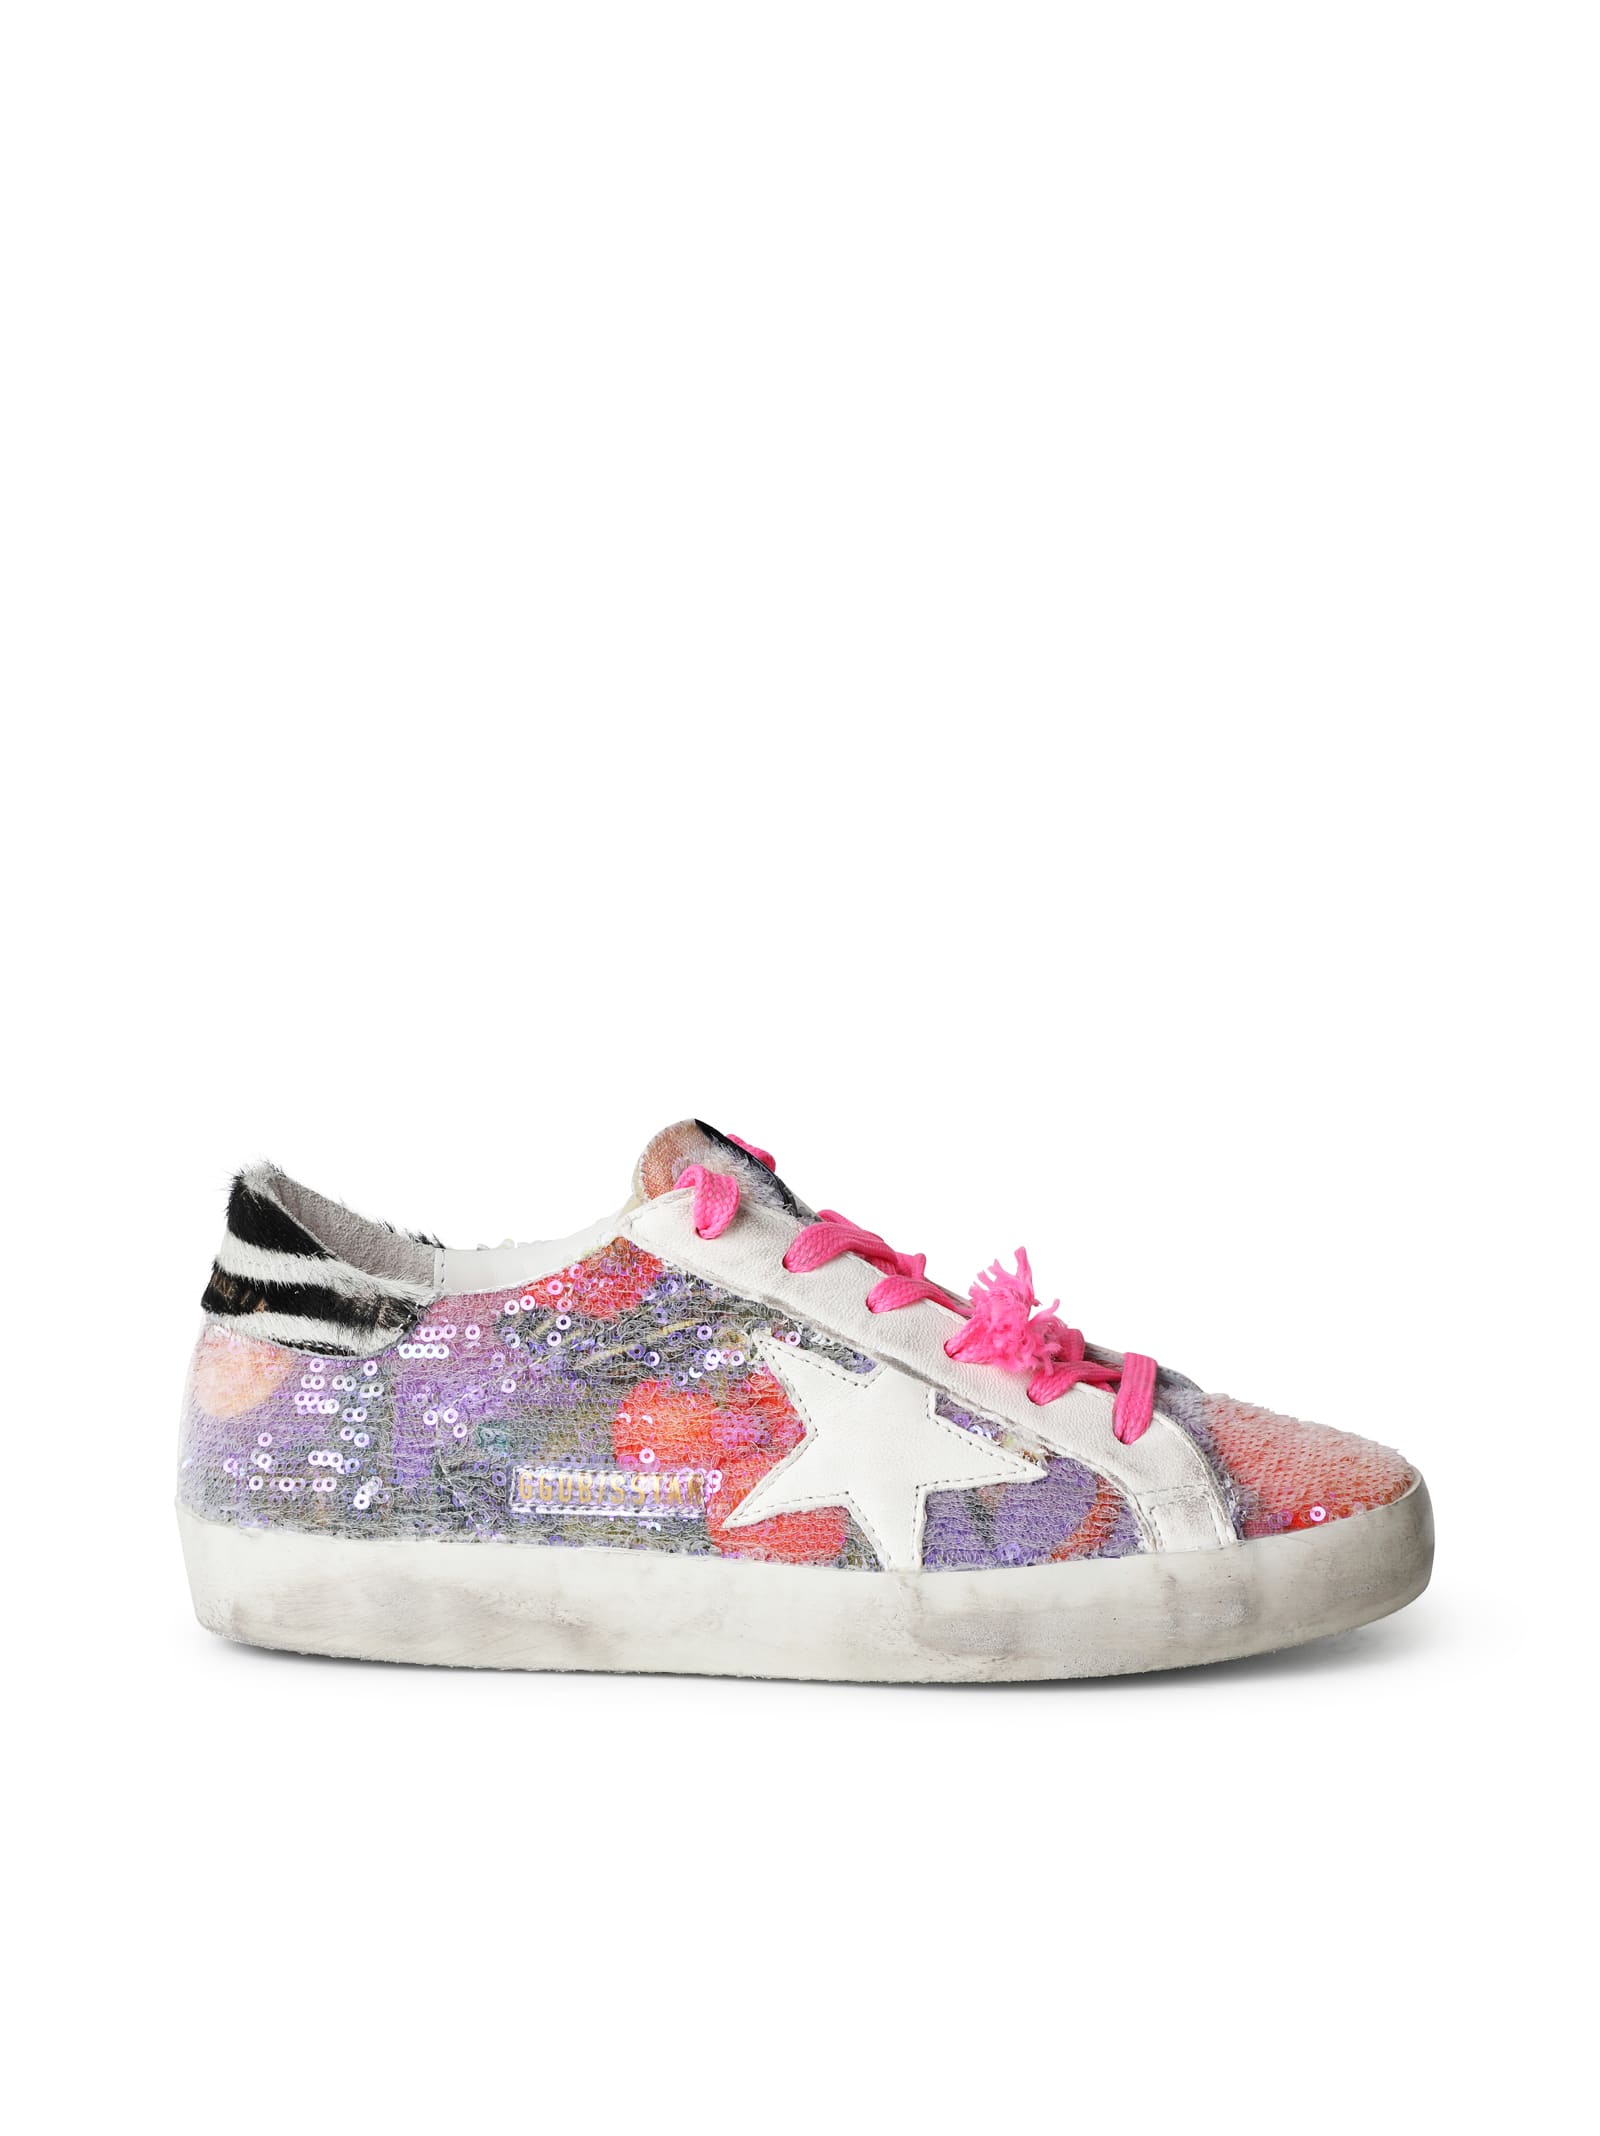 Golden Goose Super- Star Hawai I Print Canvas With Embroidery Pai Llettes Nappa Star Zebra Horsy Heel